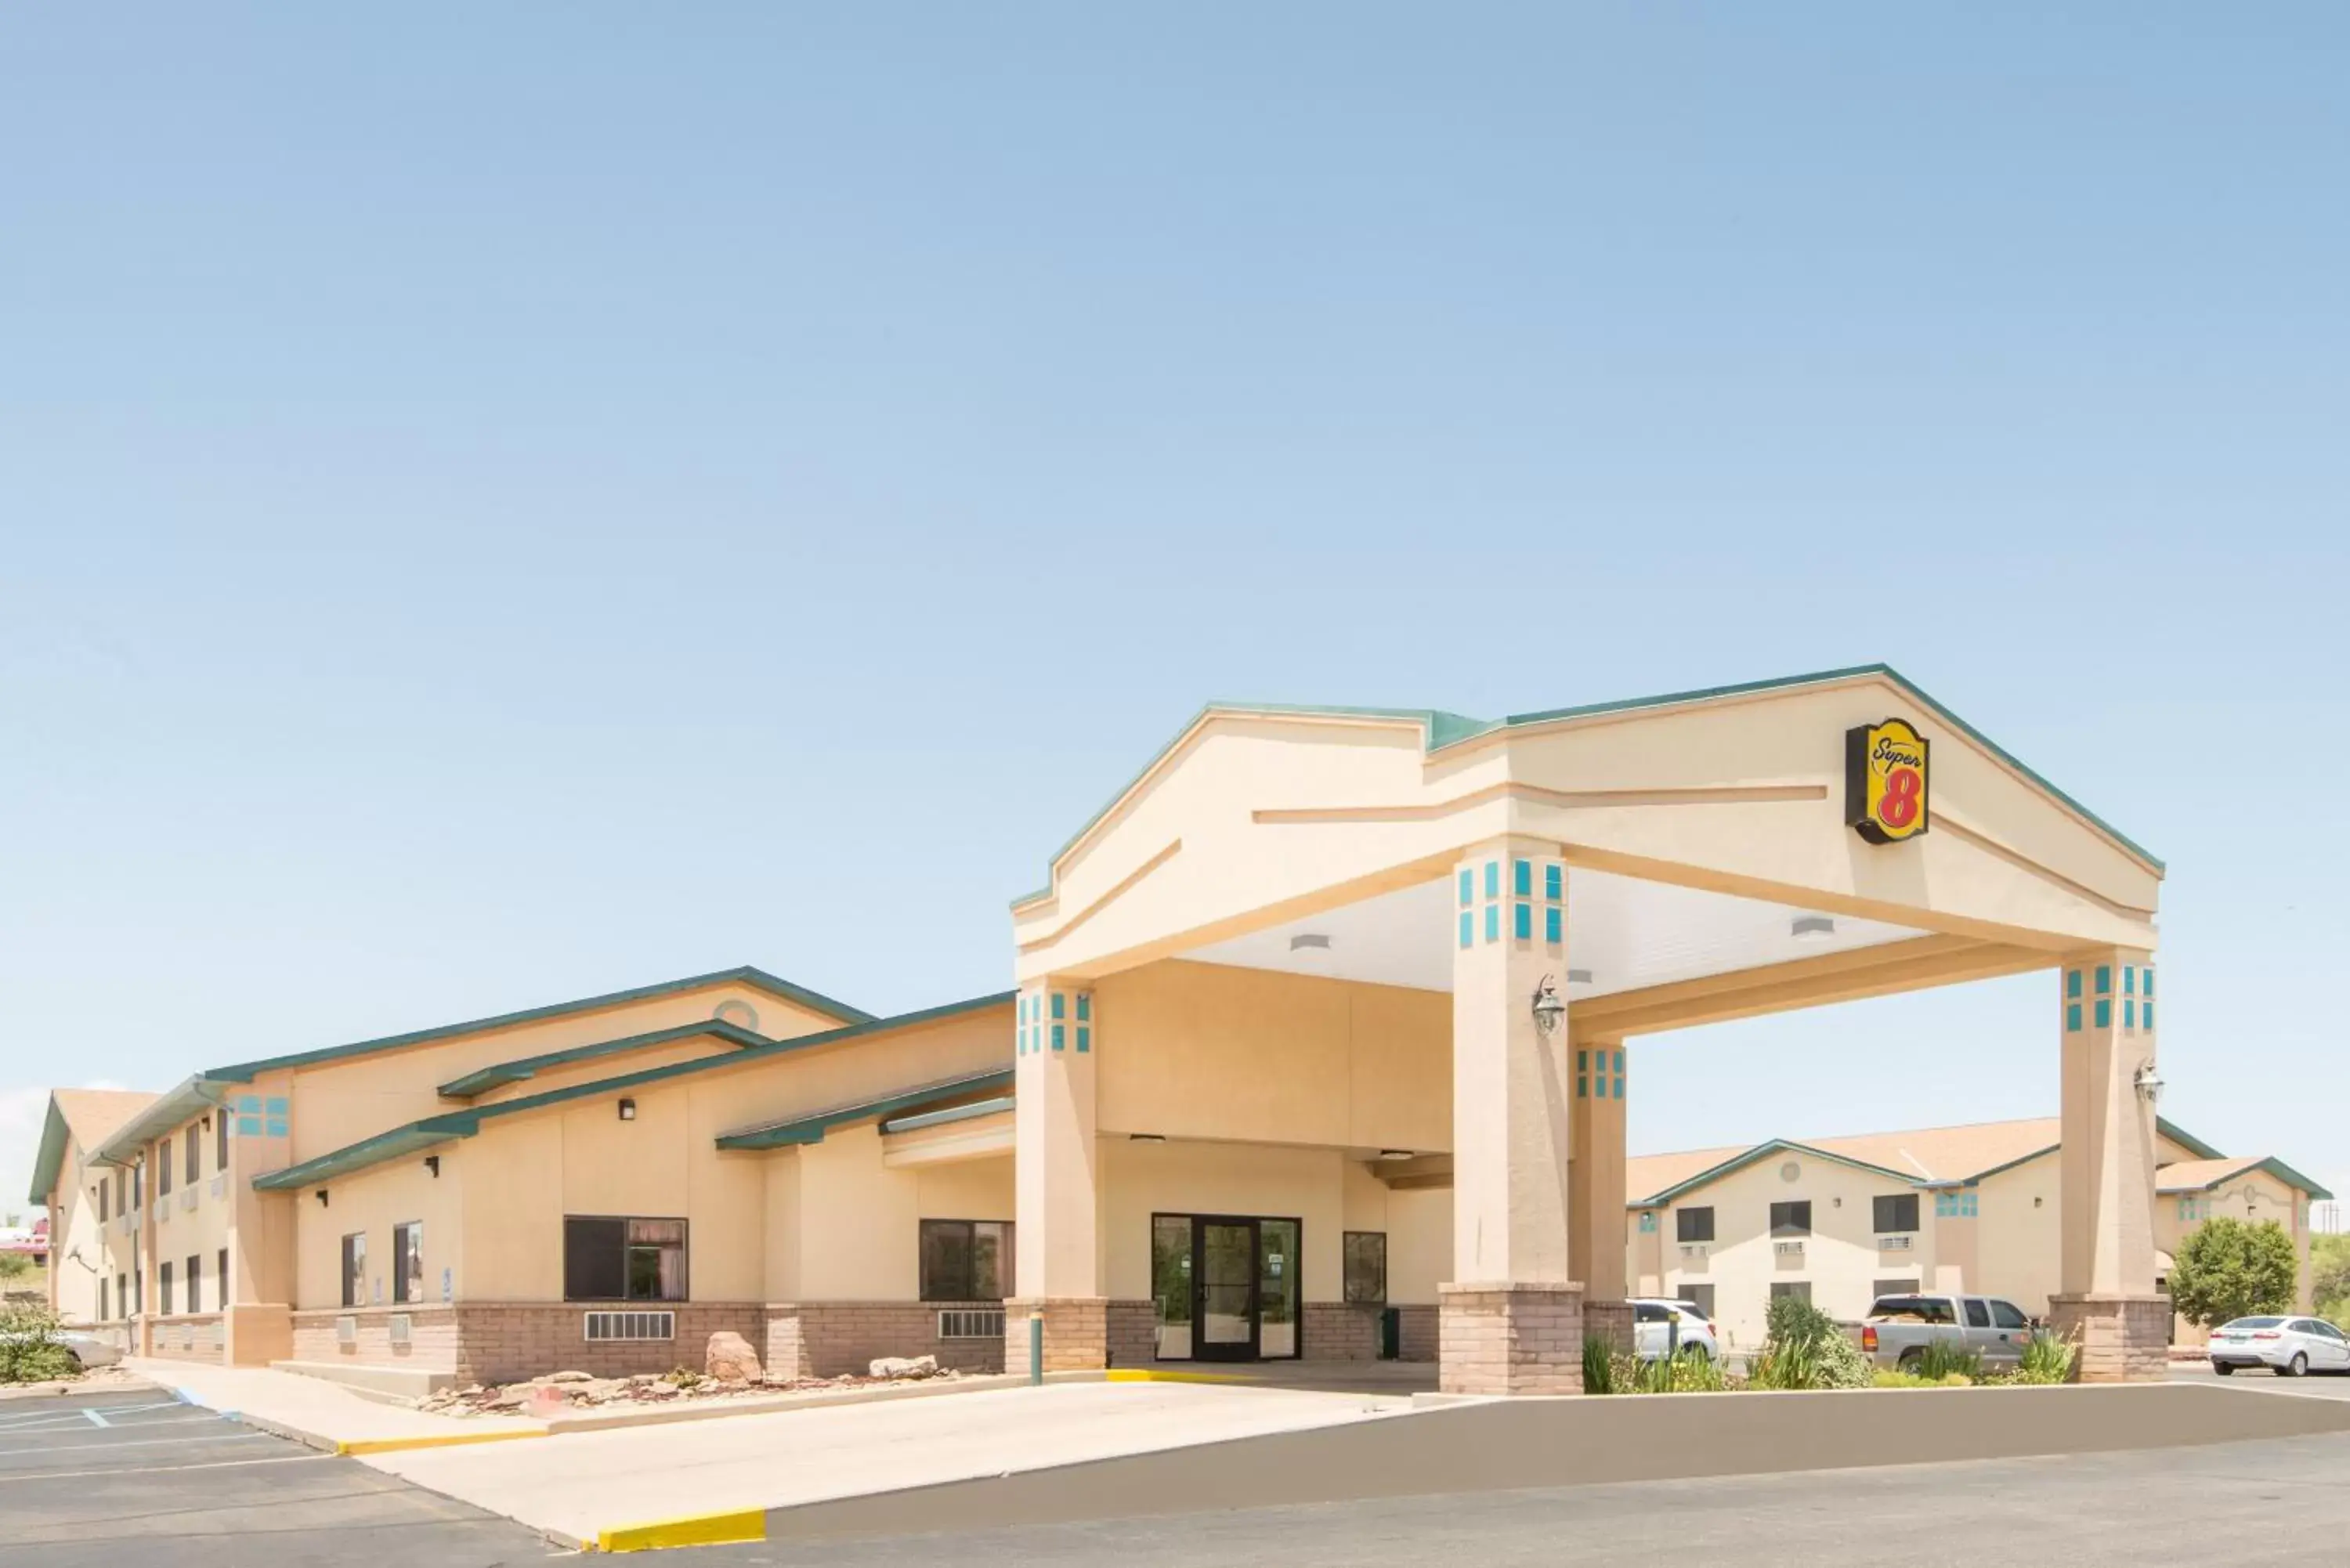 Area and facilities, Property Building in Super 8 by Wyndham Santa Rosa